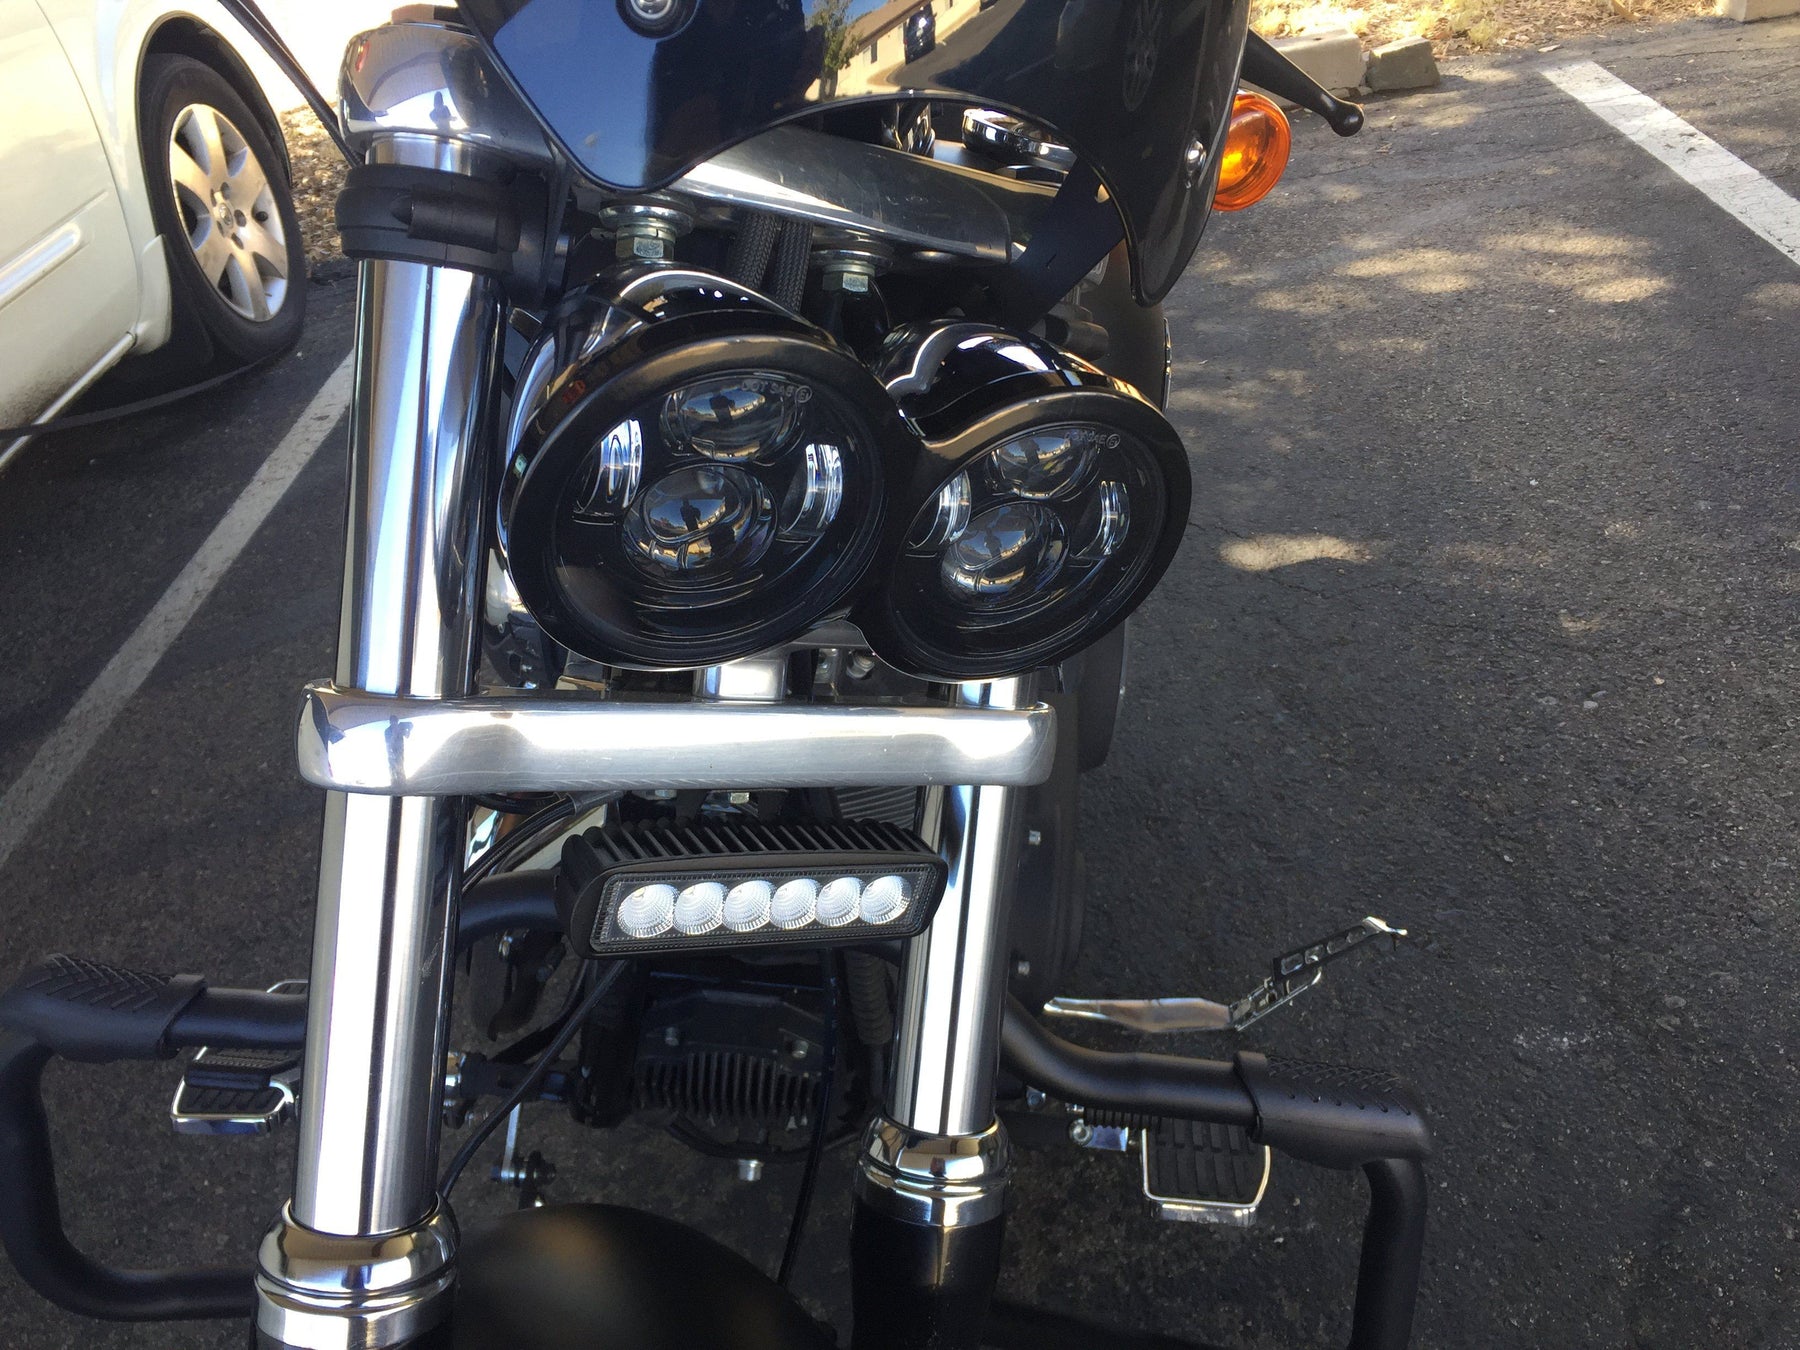 Eagle Lights Elite Series 6" LED Light Bar with Plug and Play Harness for Harley Davidson Softail and Dyna Models - 2500Lm, Flood Pattern - Harness Included